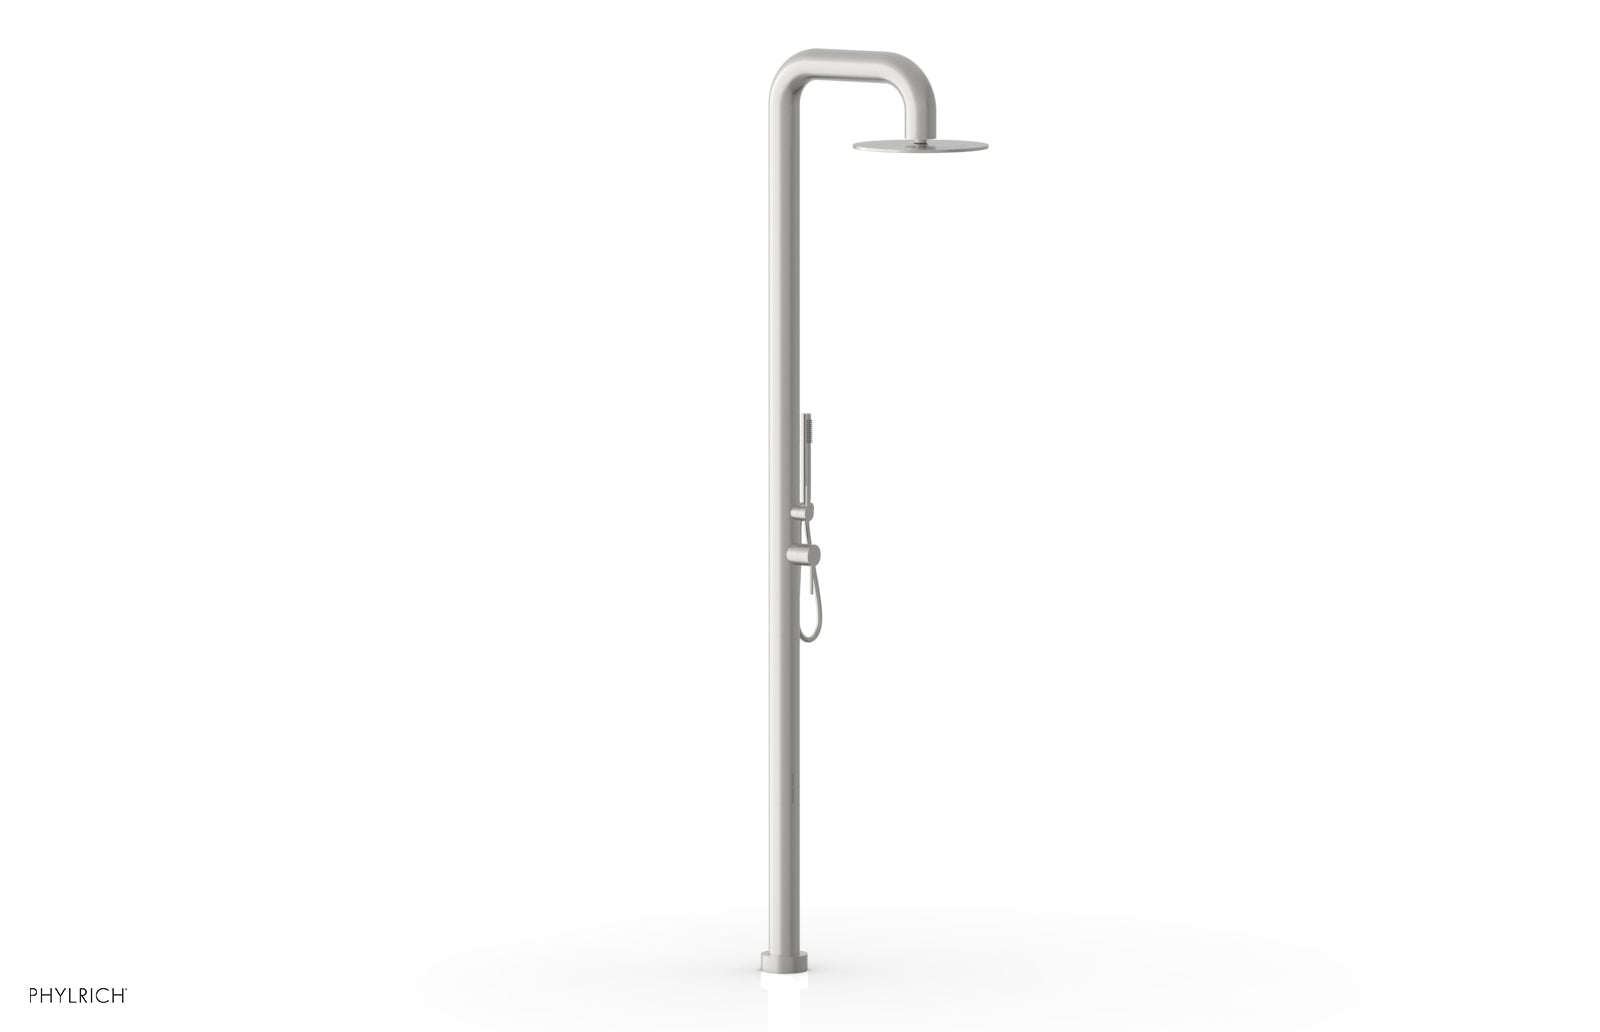 Phylrich OUTDOOR SHOWER Pressure Balance Shower with 12" Rain Head and Hand Shower